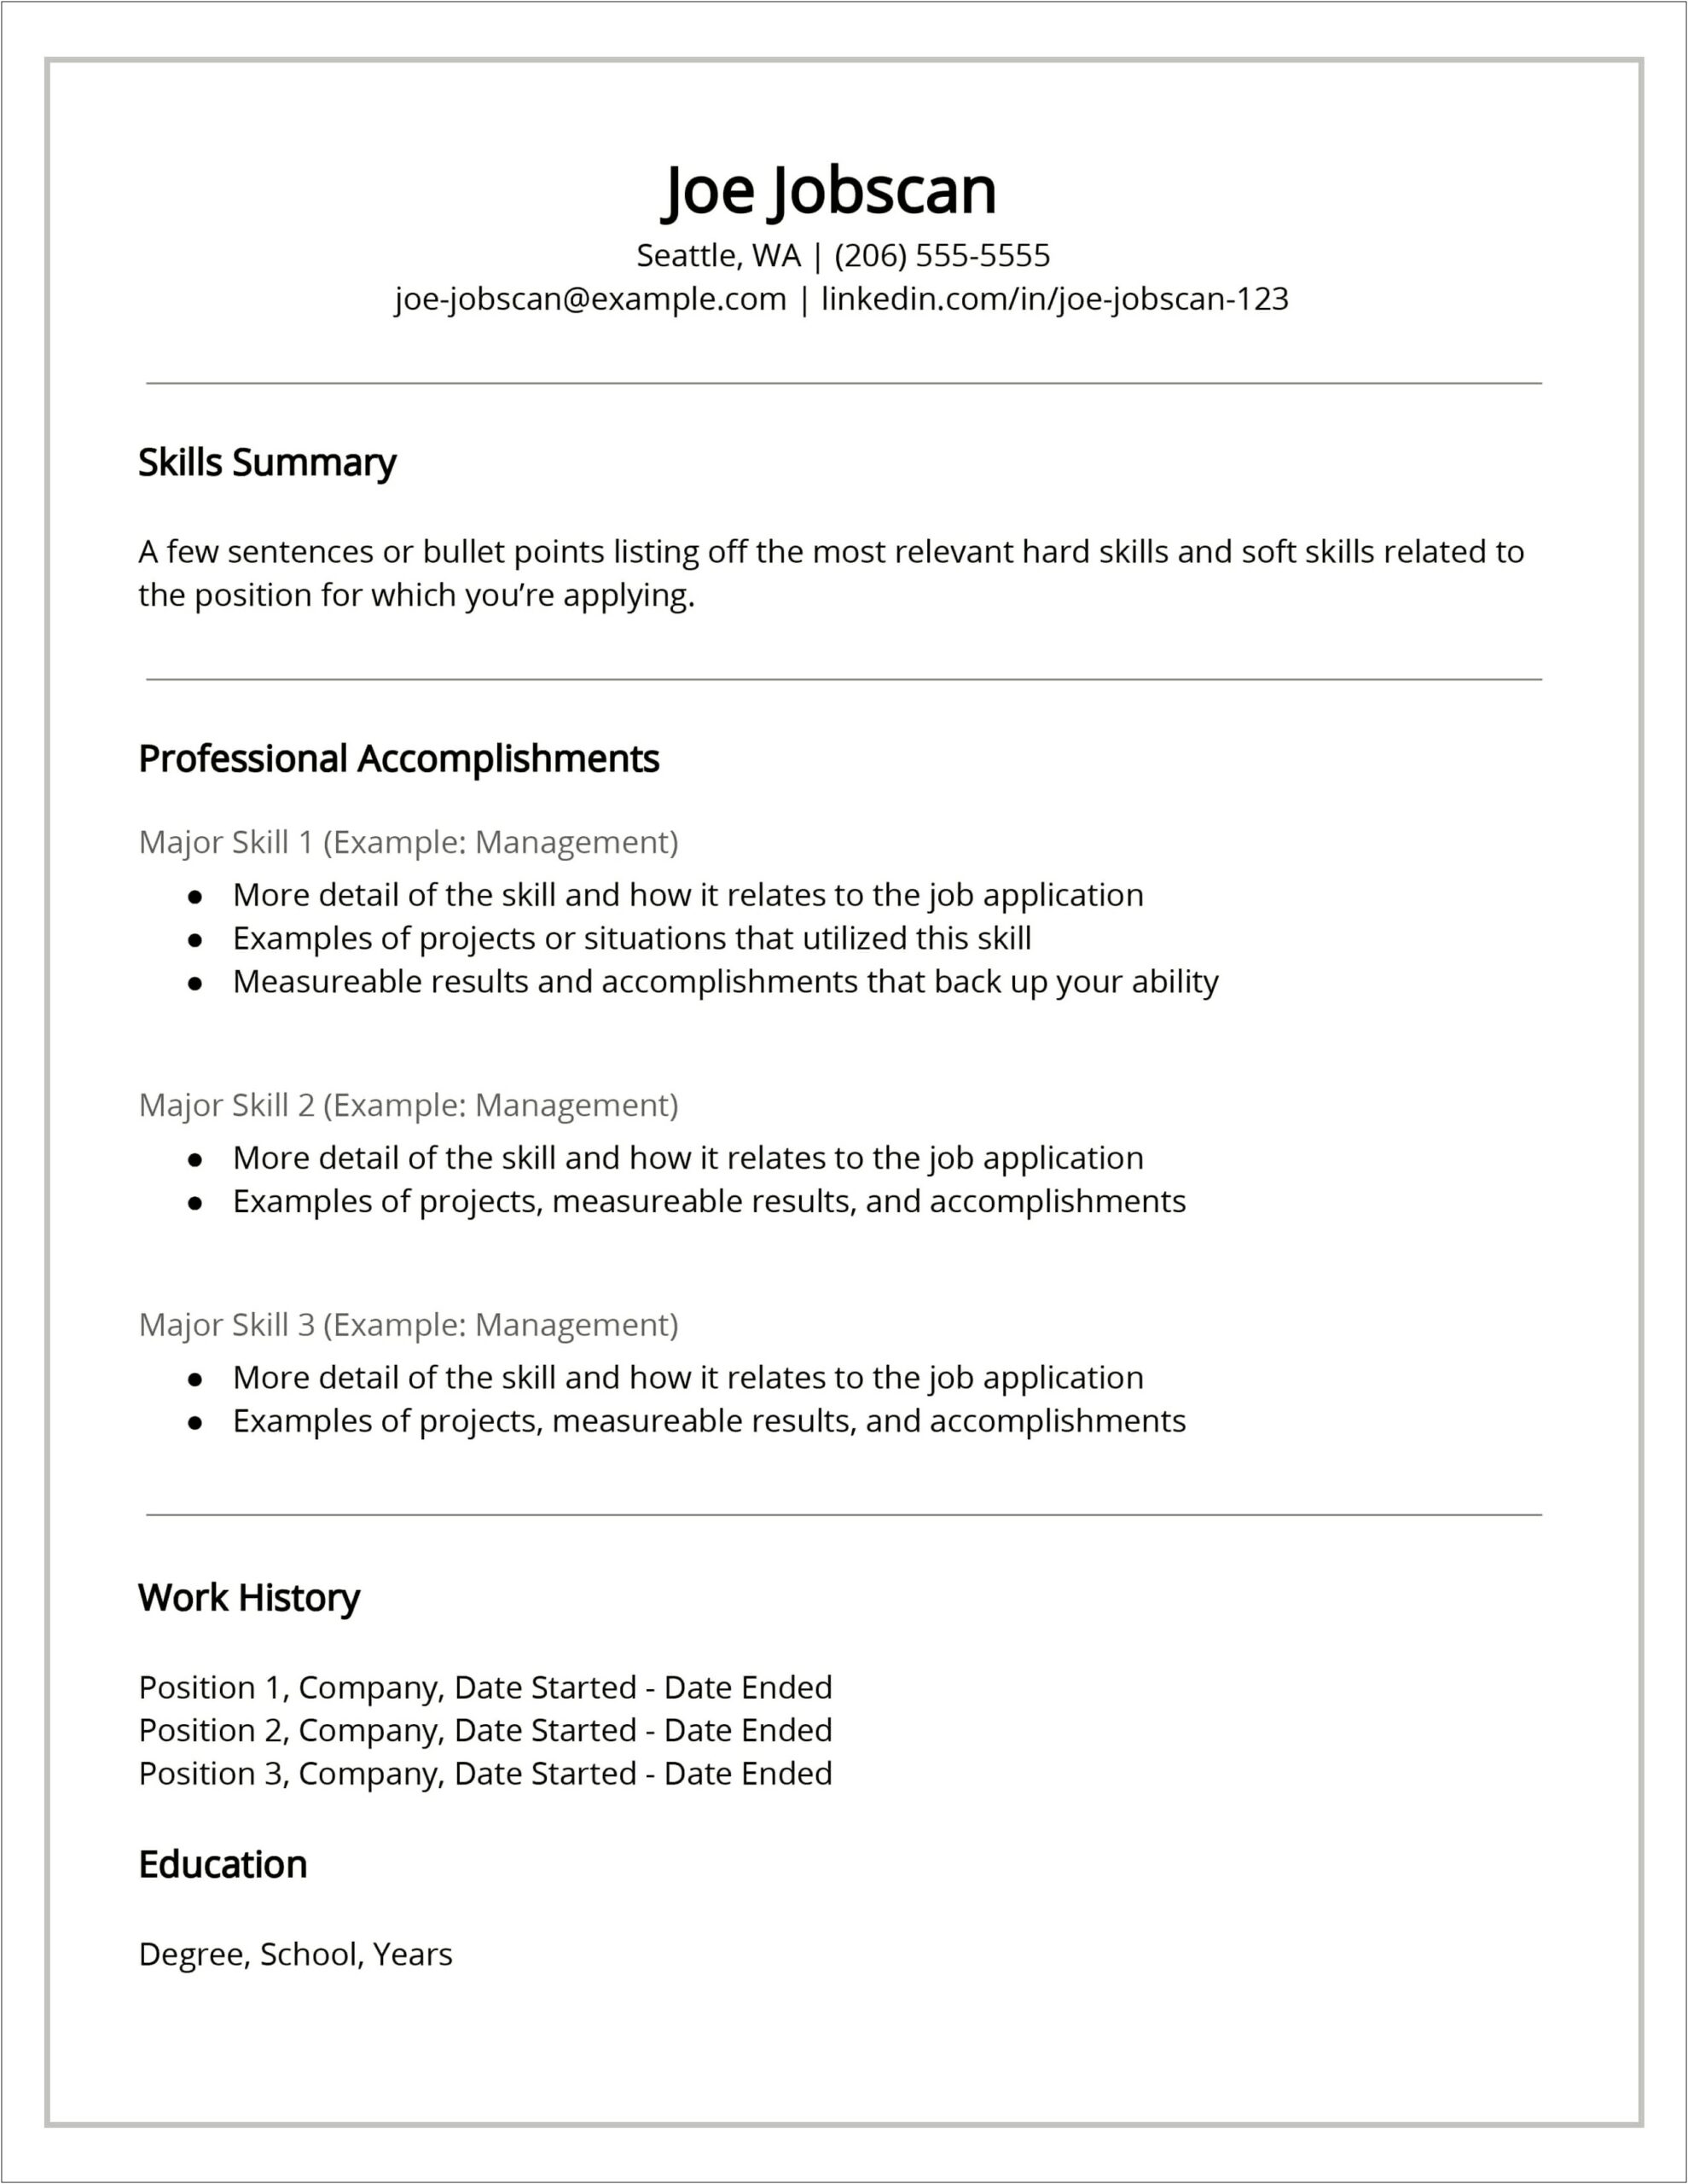 Comparison Between Job Application And Resume